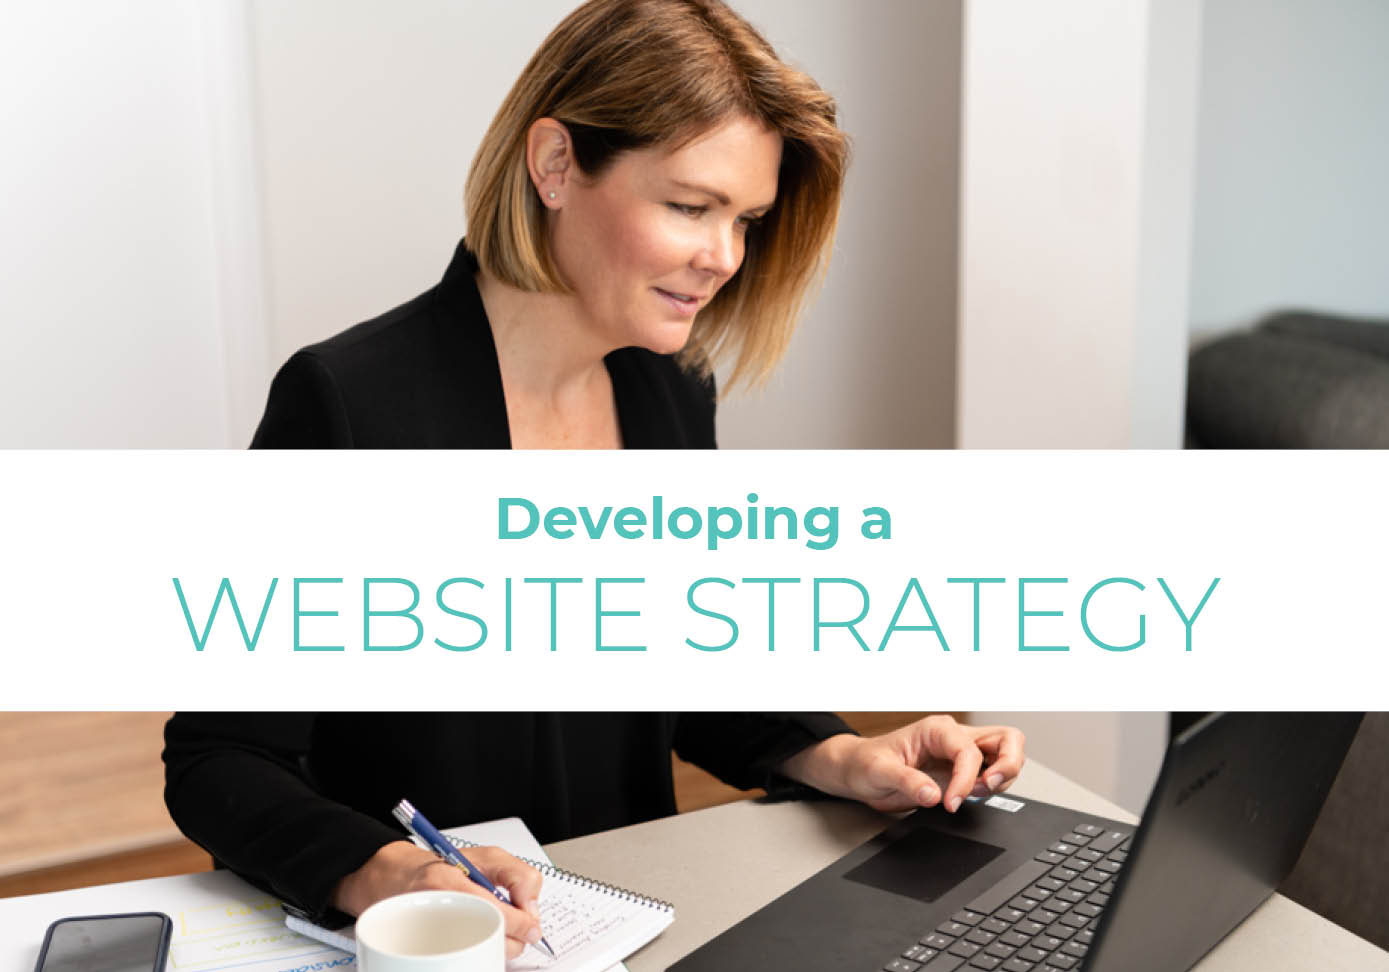 6 Must have elements of a website strategy